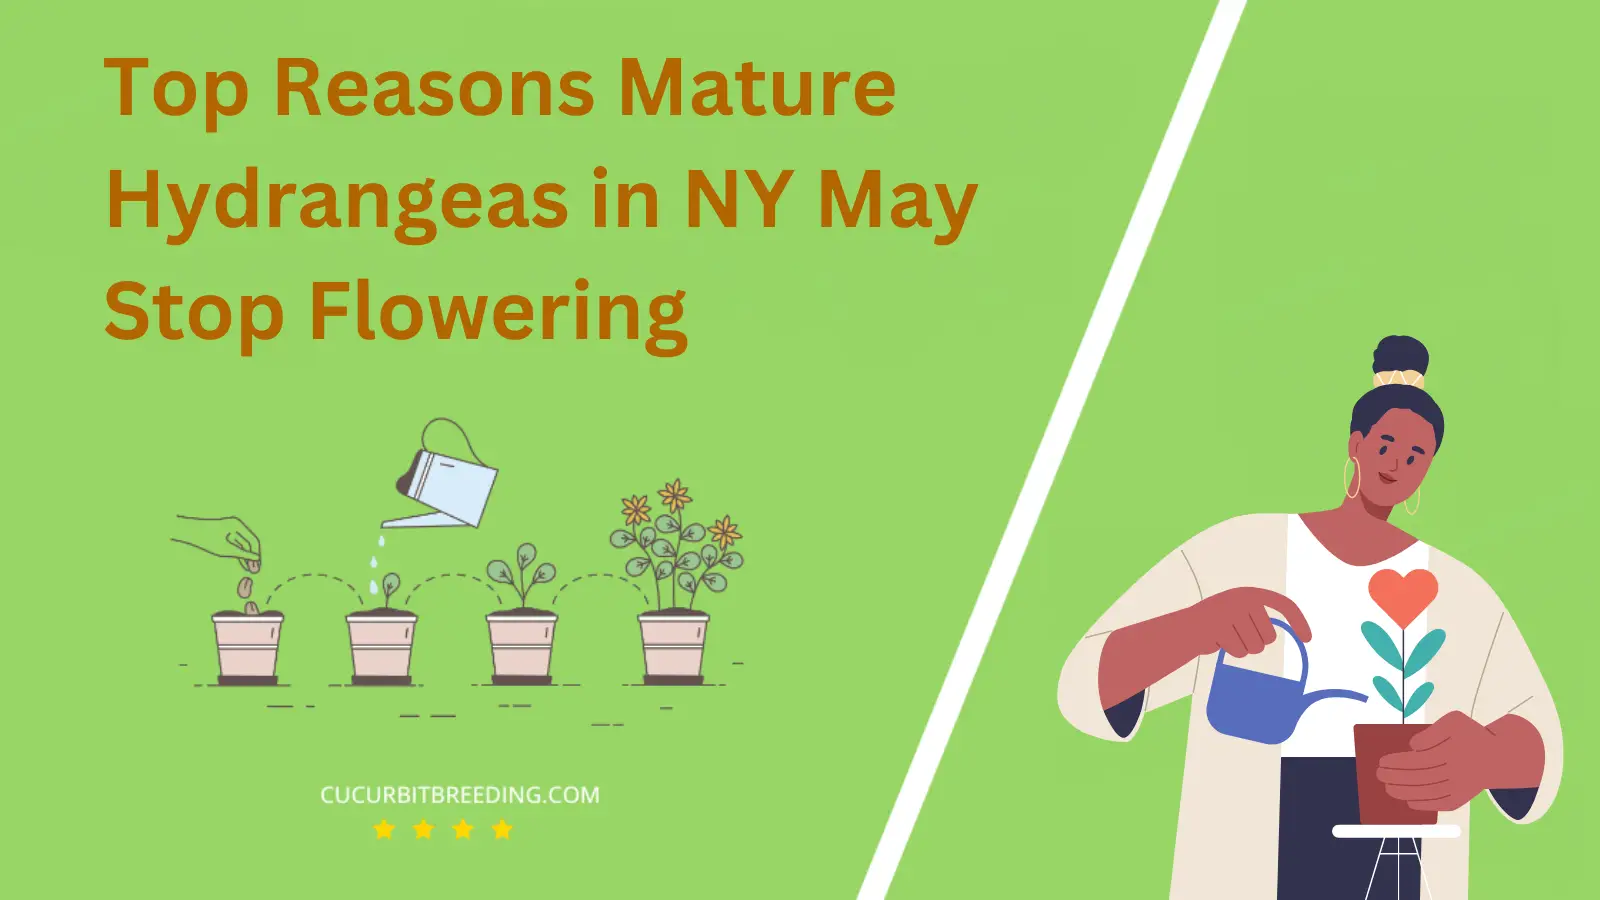 Top Reasons Mature Hydrangeas in NY May Stop Flowering